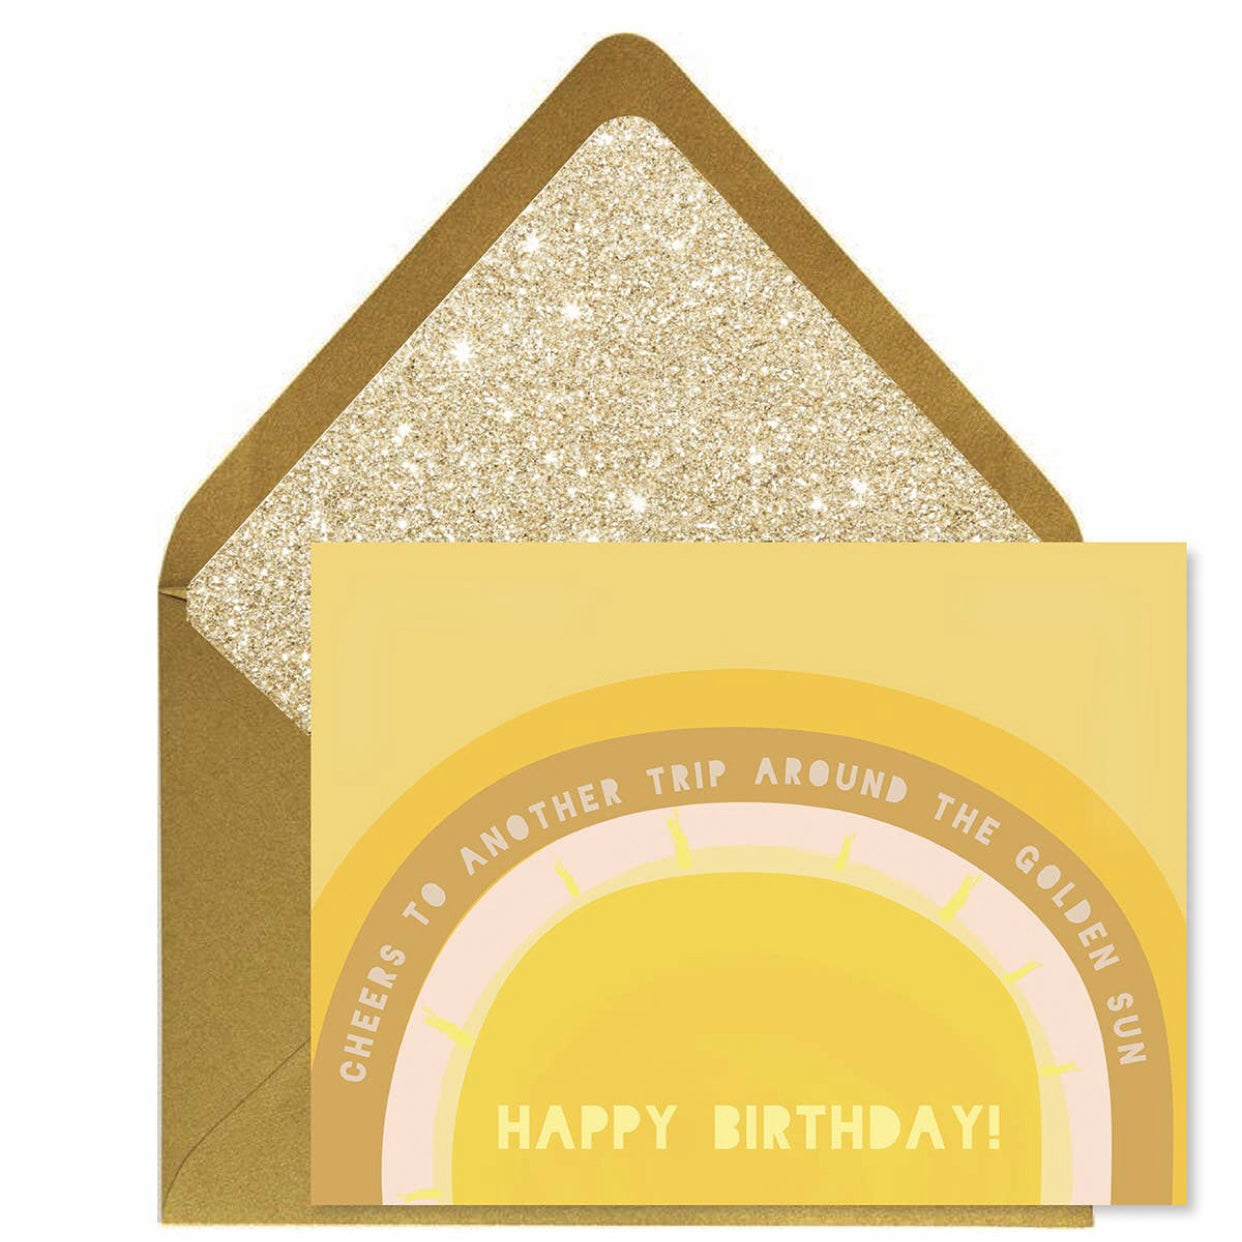 Cheers to another trip around the golden sun happy birthday greeting card